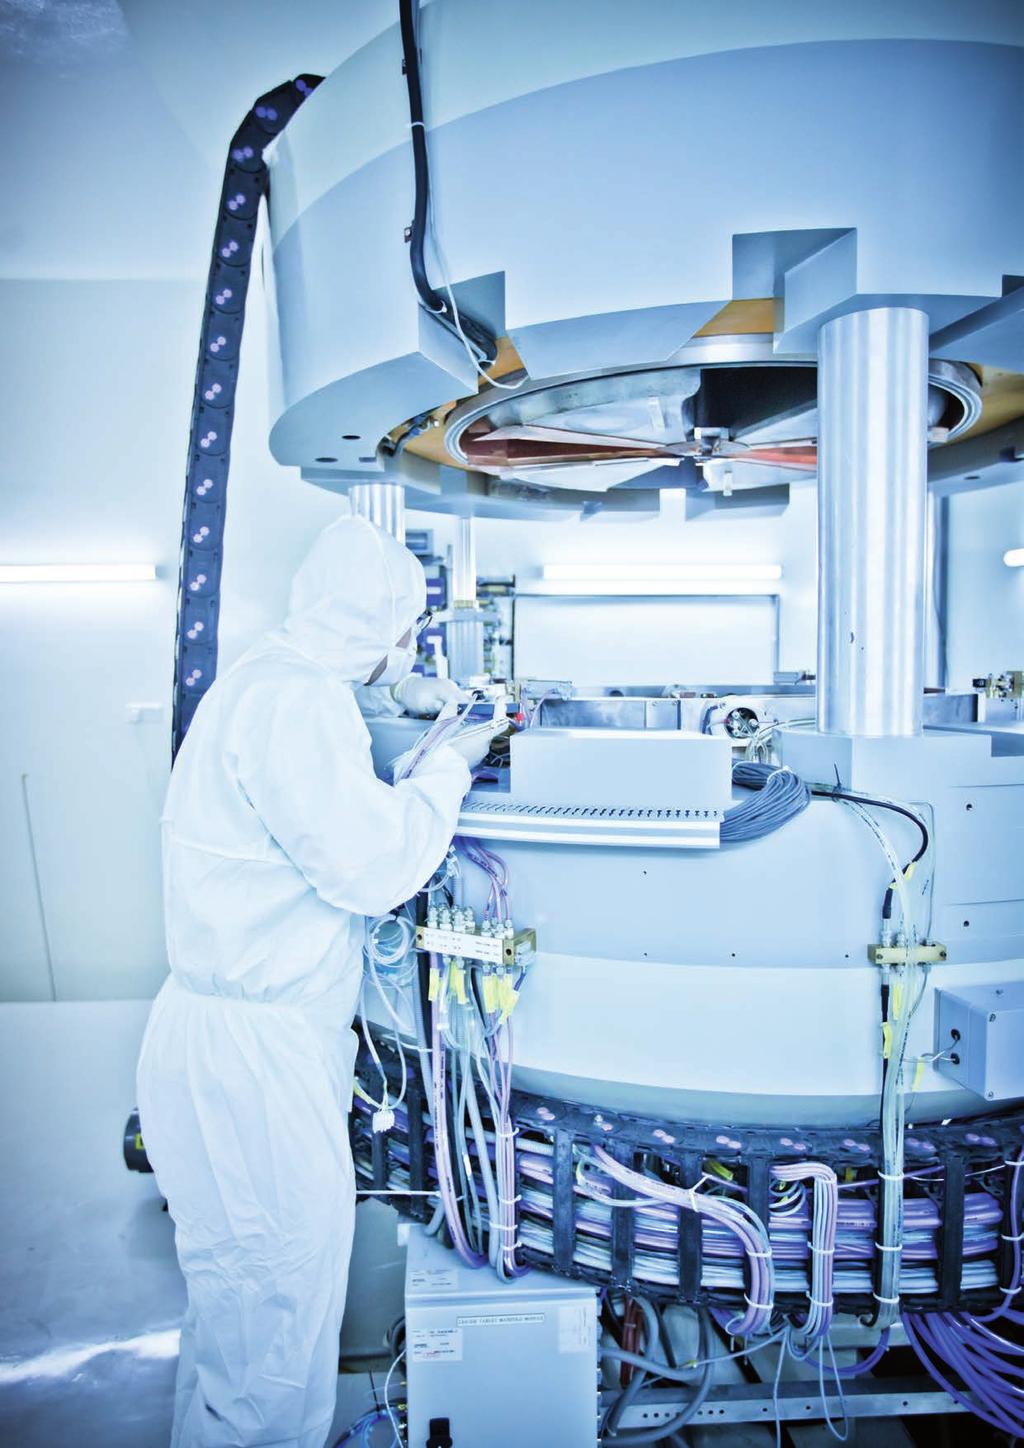 16 RADIOPHARMACY A WORLDWIDE UNIQUE KNOW-HOW IBA has developed in-depth experience in setting up medical radiopharmaceutical production centers.